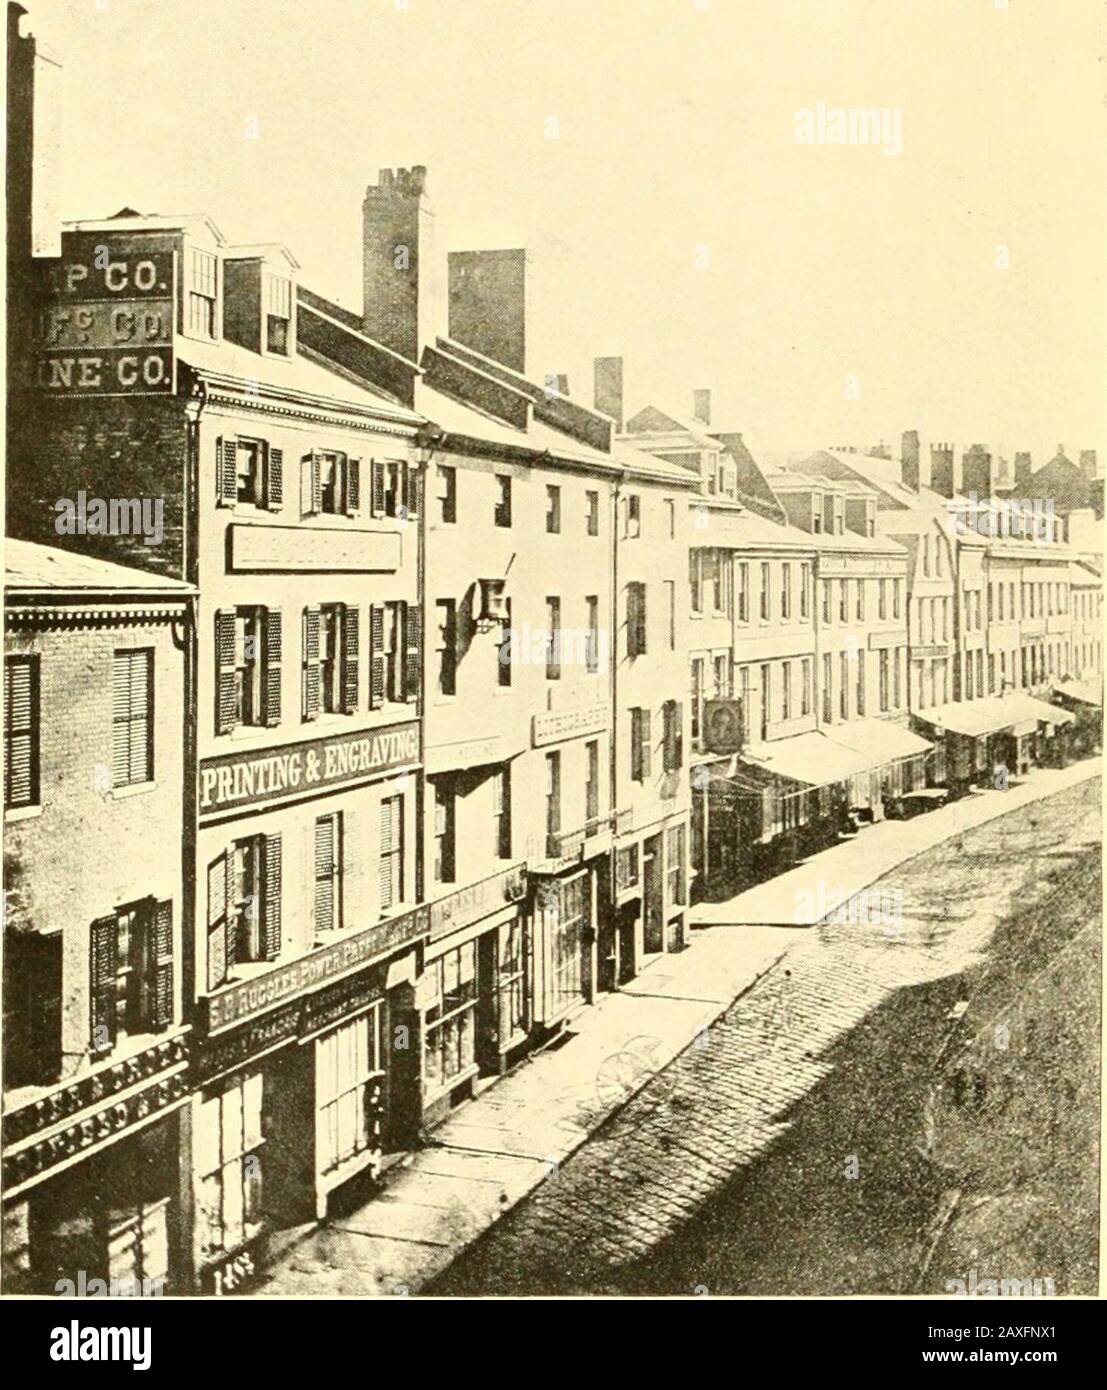 Romantic days in old Boston; the story of the city and of its people during the nineteenth century . Copyright, imii hn a II nnhm-iis THE CITY HALL OF PARKErs DAY.. WASHINGTON STREET, SOUTH OF MILK STREET IN 1858. IN OLD BOSTON 217 words went straight to the intelligence of hishearers, of whom more than one went away tosay, like a certain plain man whose commenthas come down to us, Is that Theodore Par-ker? You told me he was remarkable but Iunderstood every word he said. There were prayers, too, at this church, talks with God which heartened all whoheard them, so simply beautiful were they.Lo Stock Photo